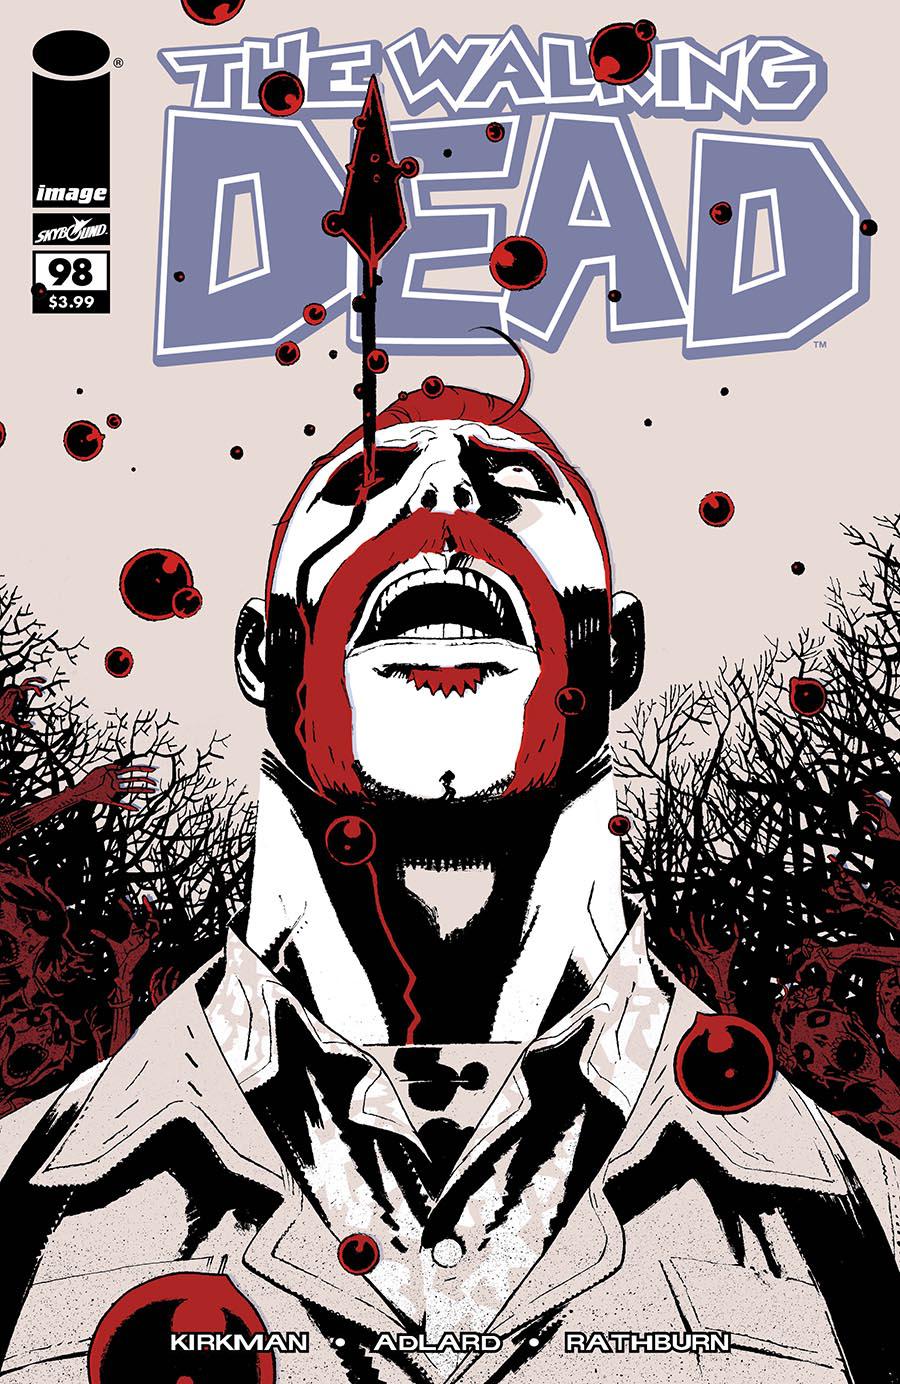 Walking Dead 15th Anniversary Blind Bag Edition #98 Cover B Wes Craig Color Cover Without Polybag